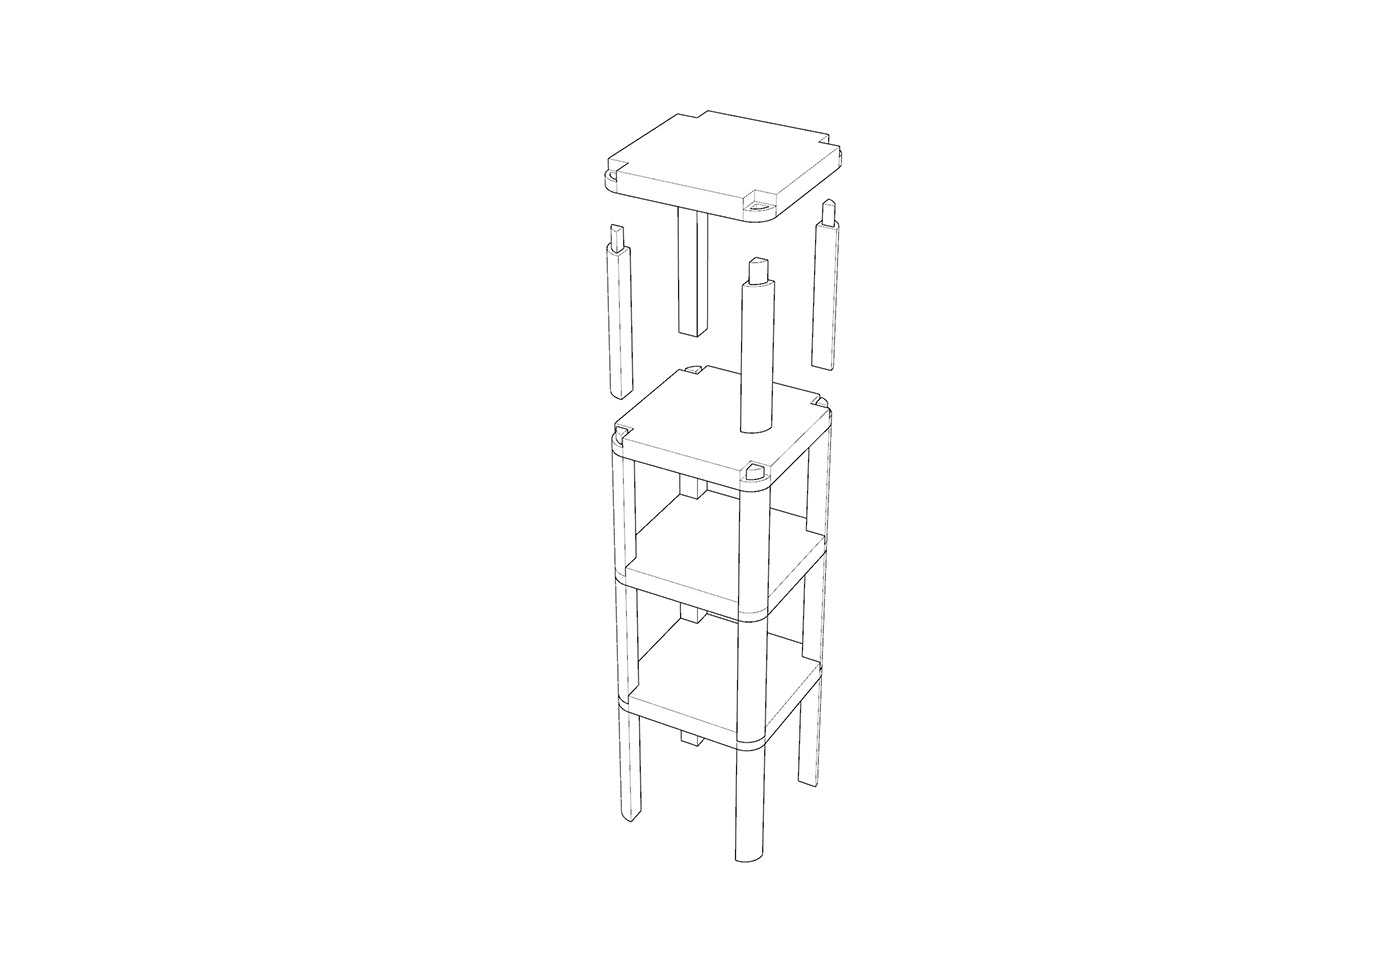 Early prototype drawing of the stackable stool concept.